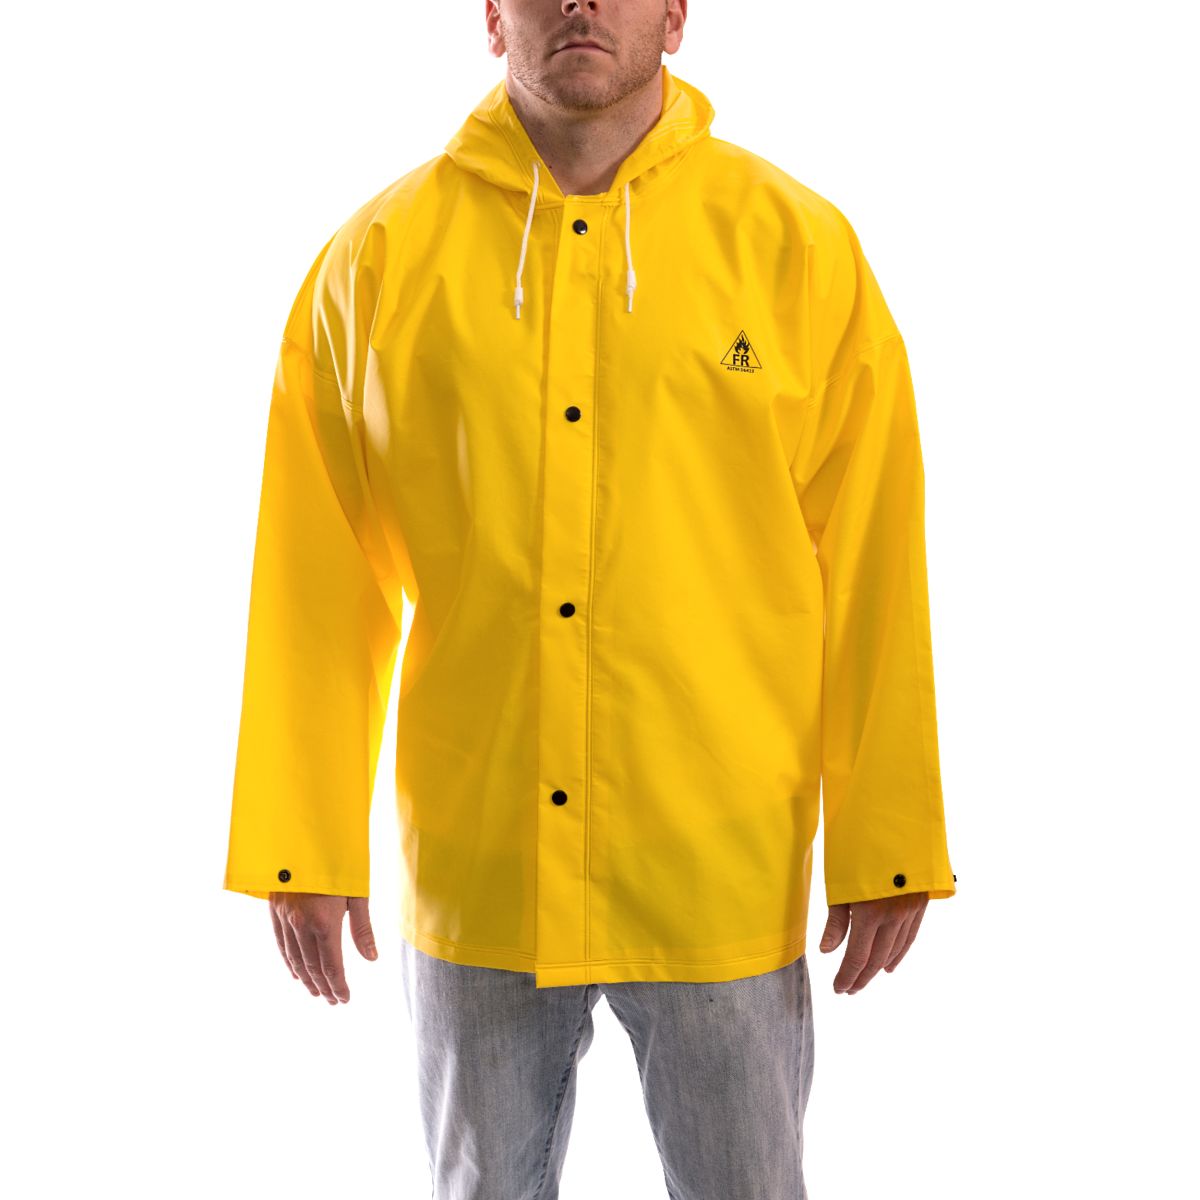 Rain Jacket, Yellow - Storm Fly Front – Attached Hood — 3XL